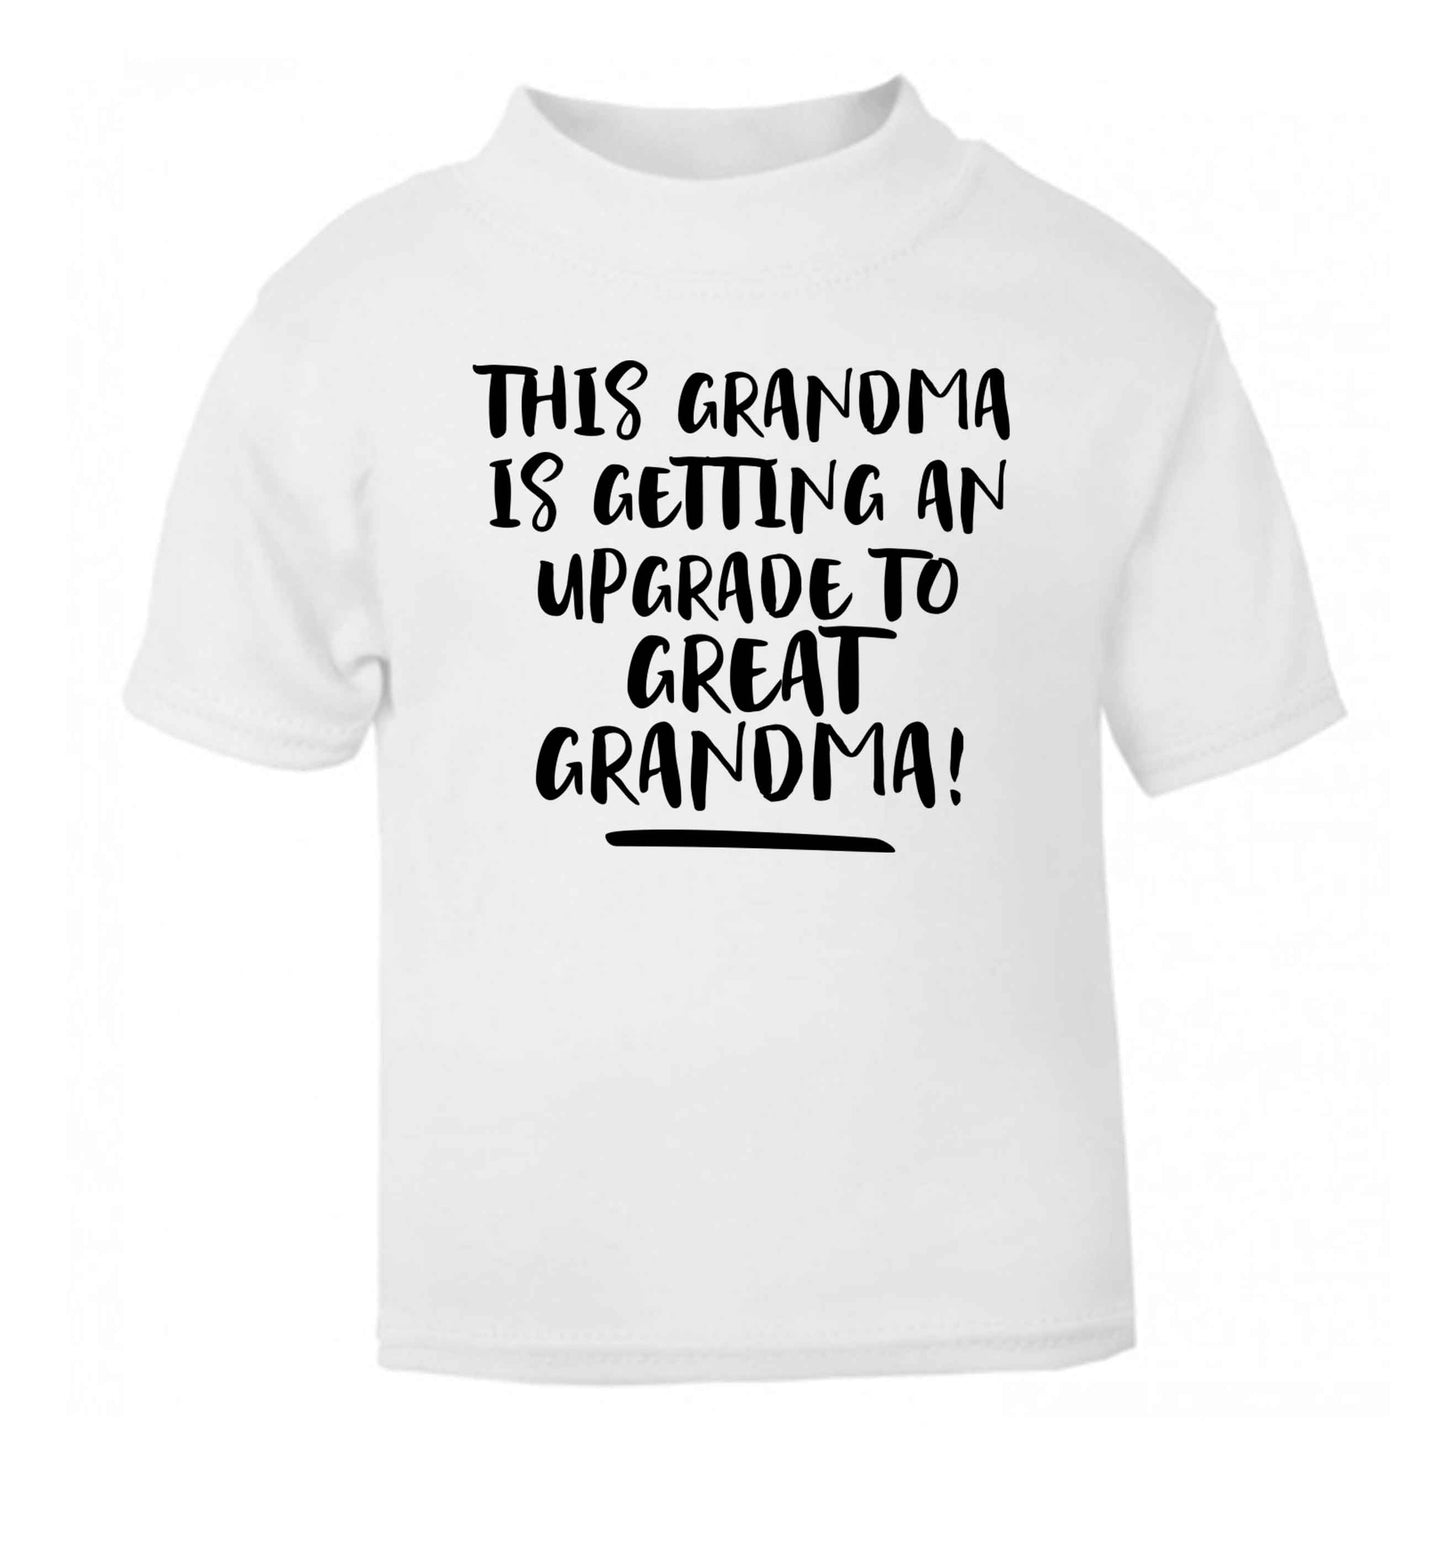 This grandma is getting an upgrade to great grandma! white Baby Toddler Tshirt 2 Years